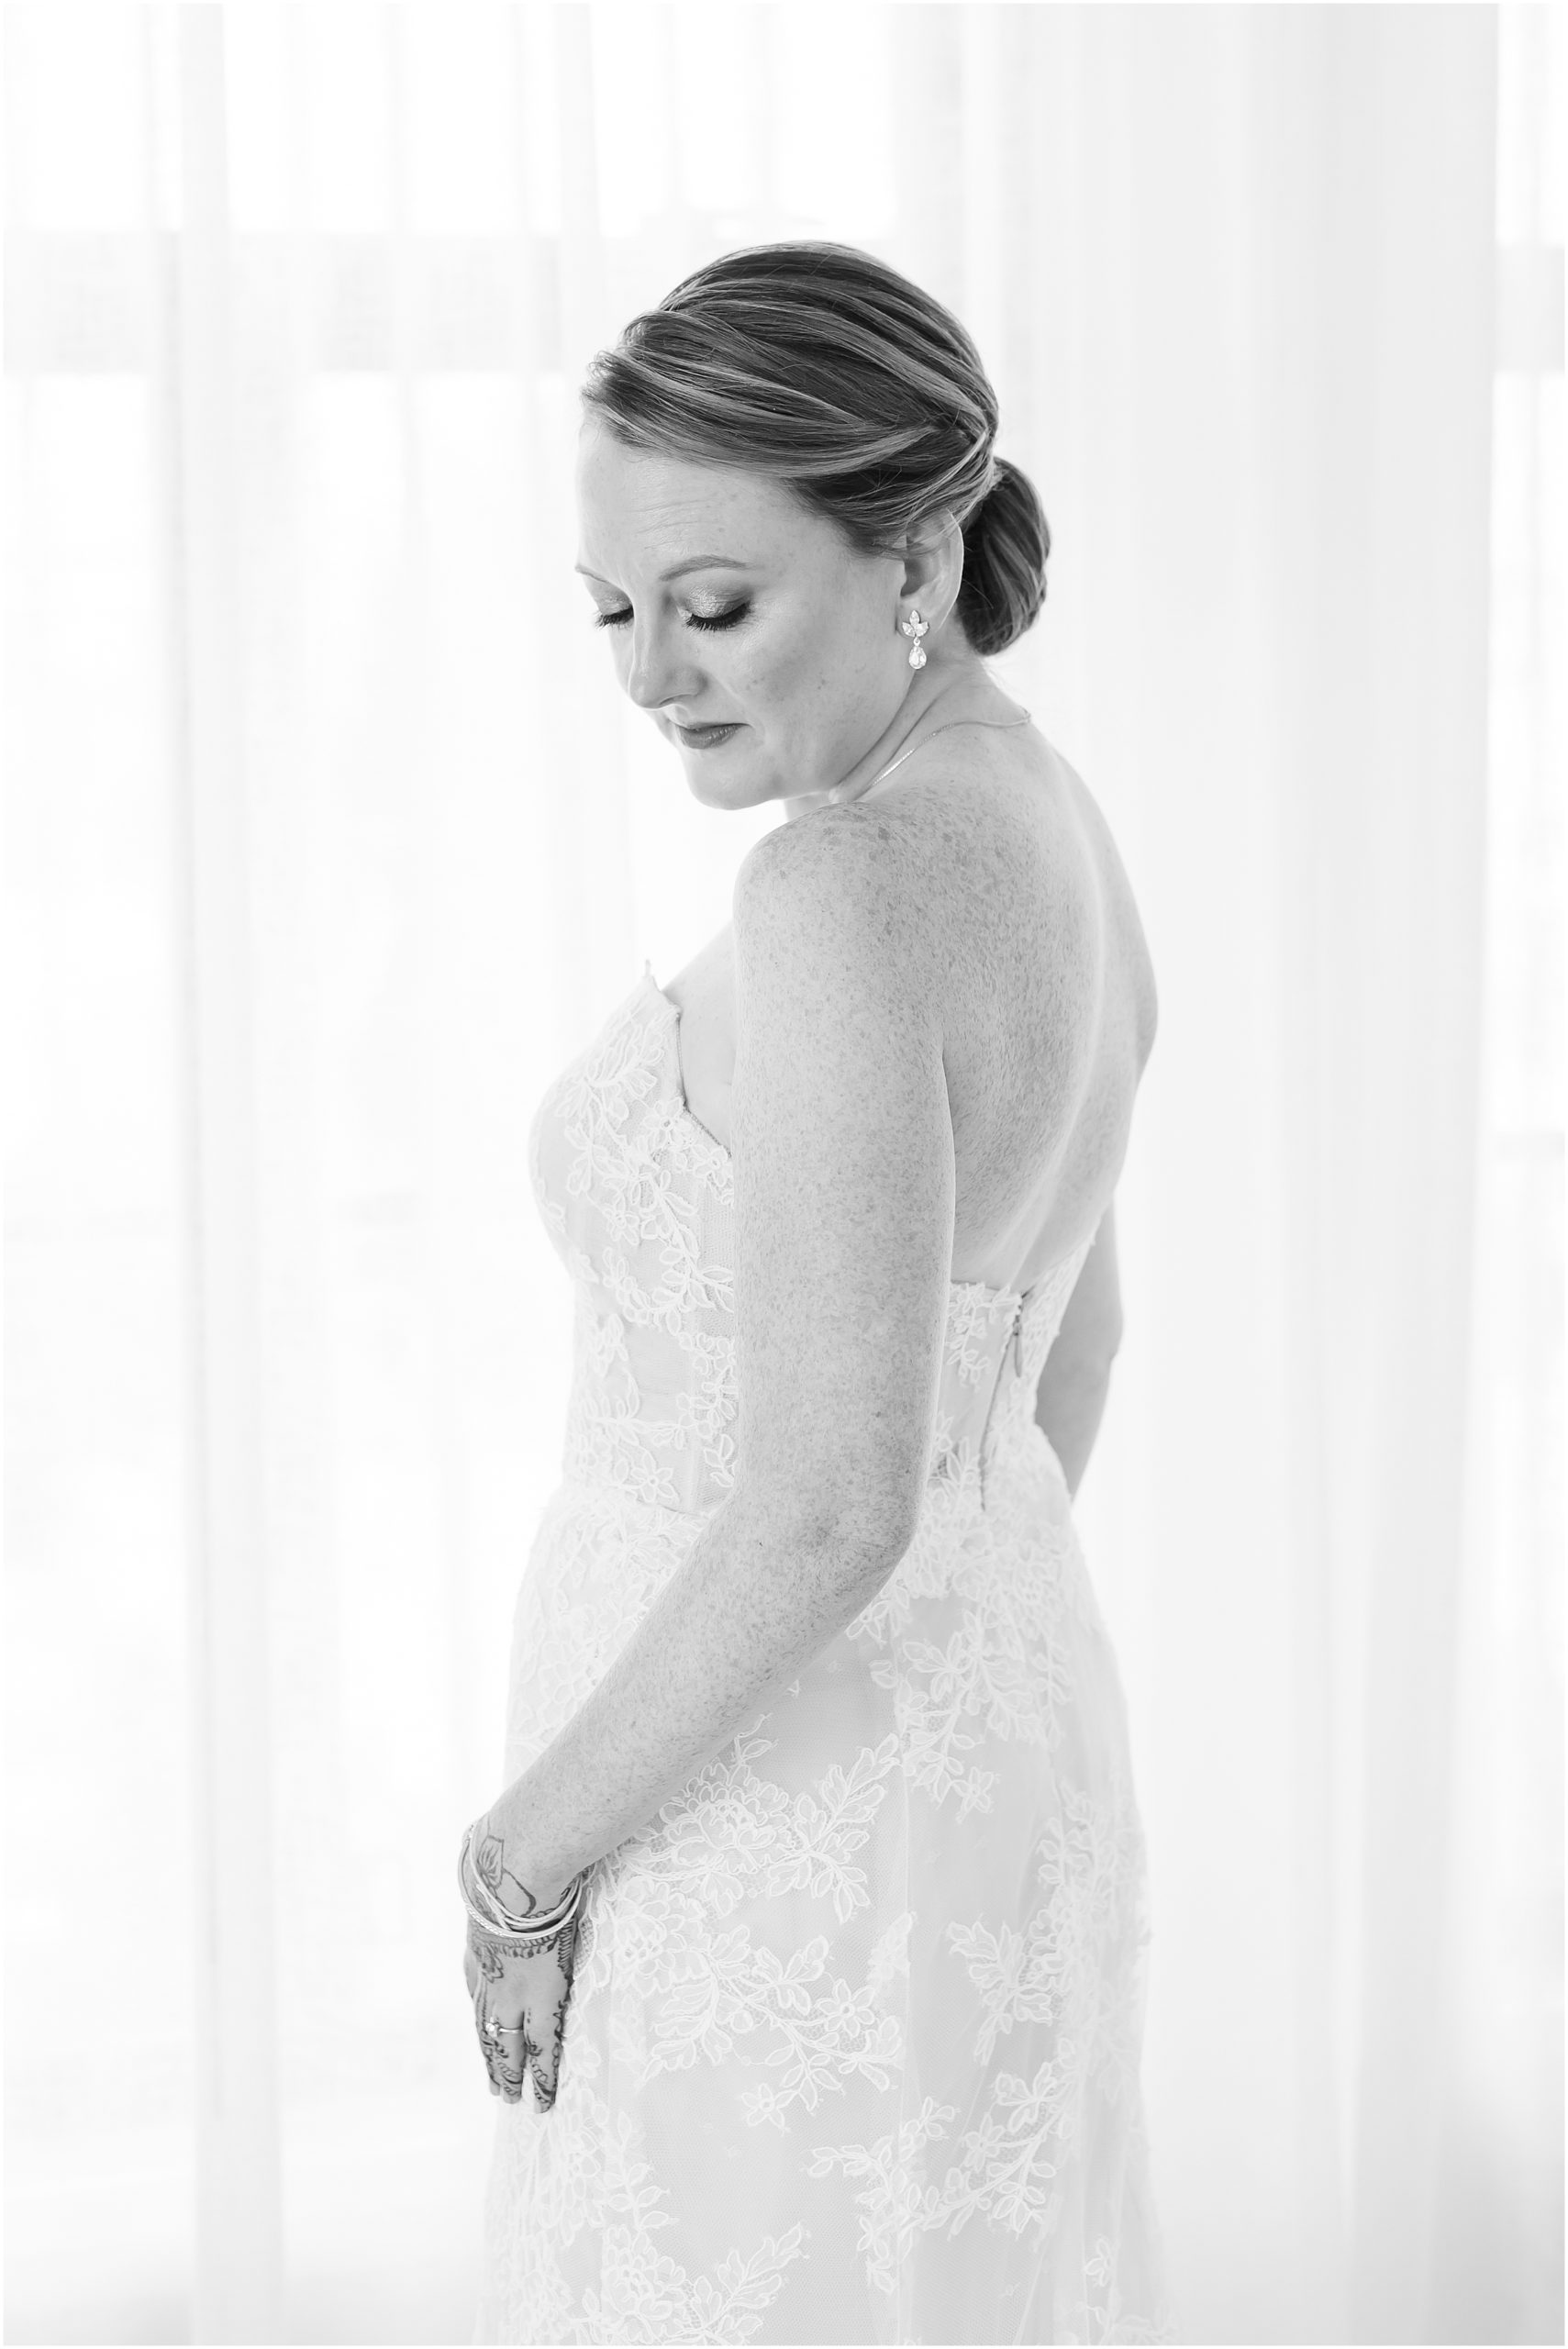 Black and white portrait of bride in strapless wedding dress